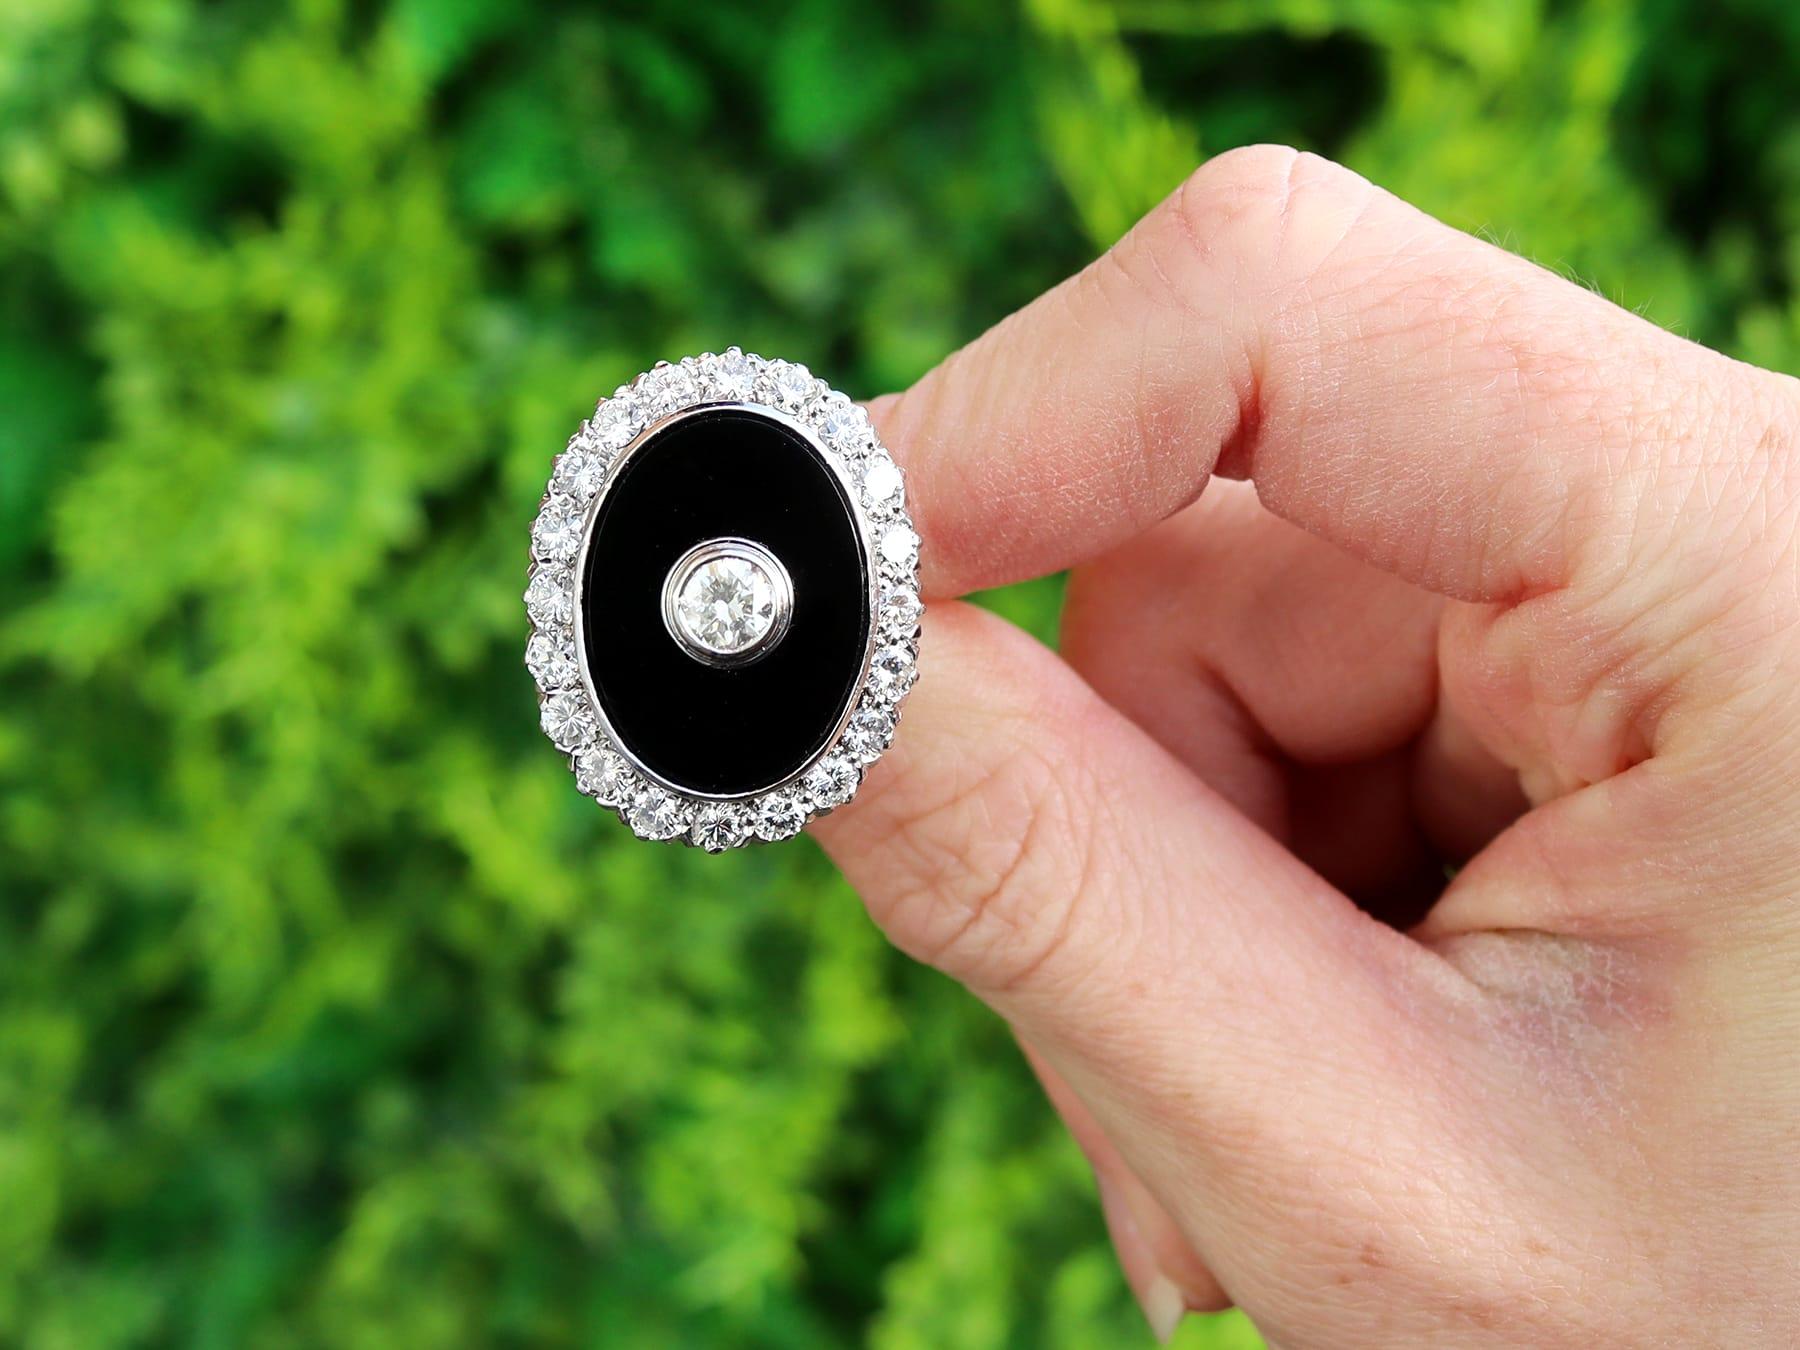 A stunning, fine and impressive, large vintage 5.22 carat black onyx and 3.64 carat diamond, 18 karat white gold dress ring; part of our diverse vintage jewellery and estate jewelry collections.

This stunning, fine and impressive vintage ring has